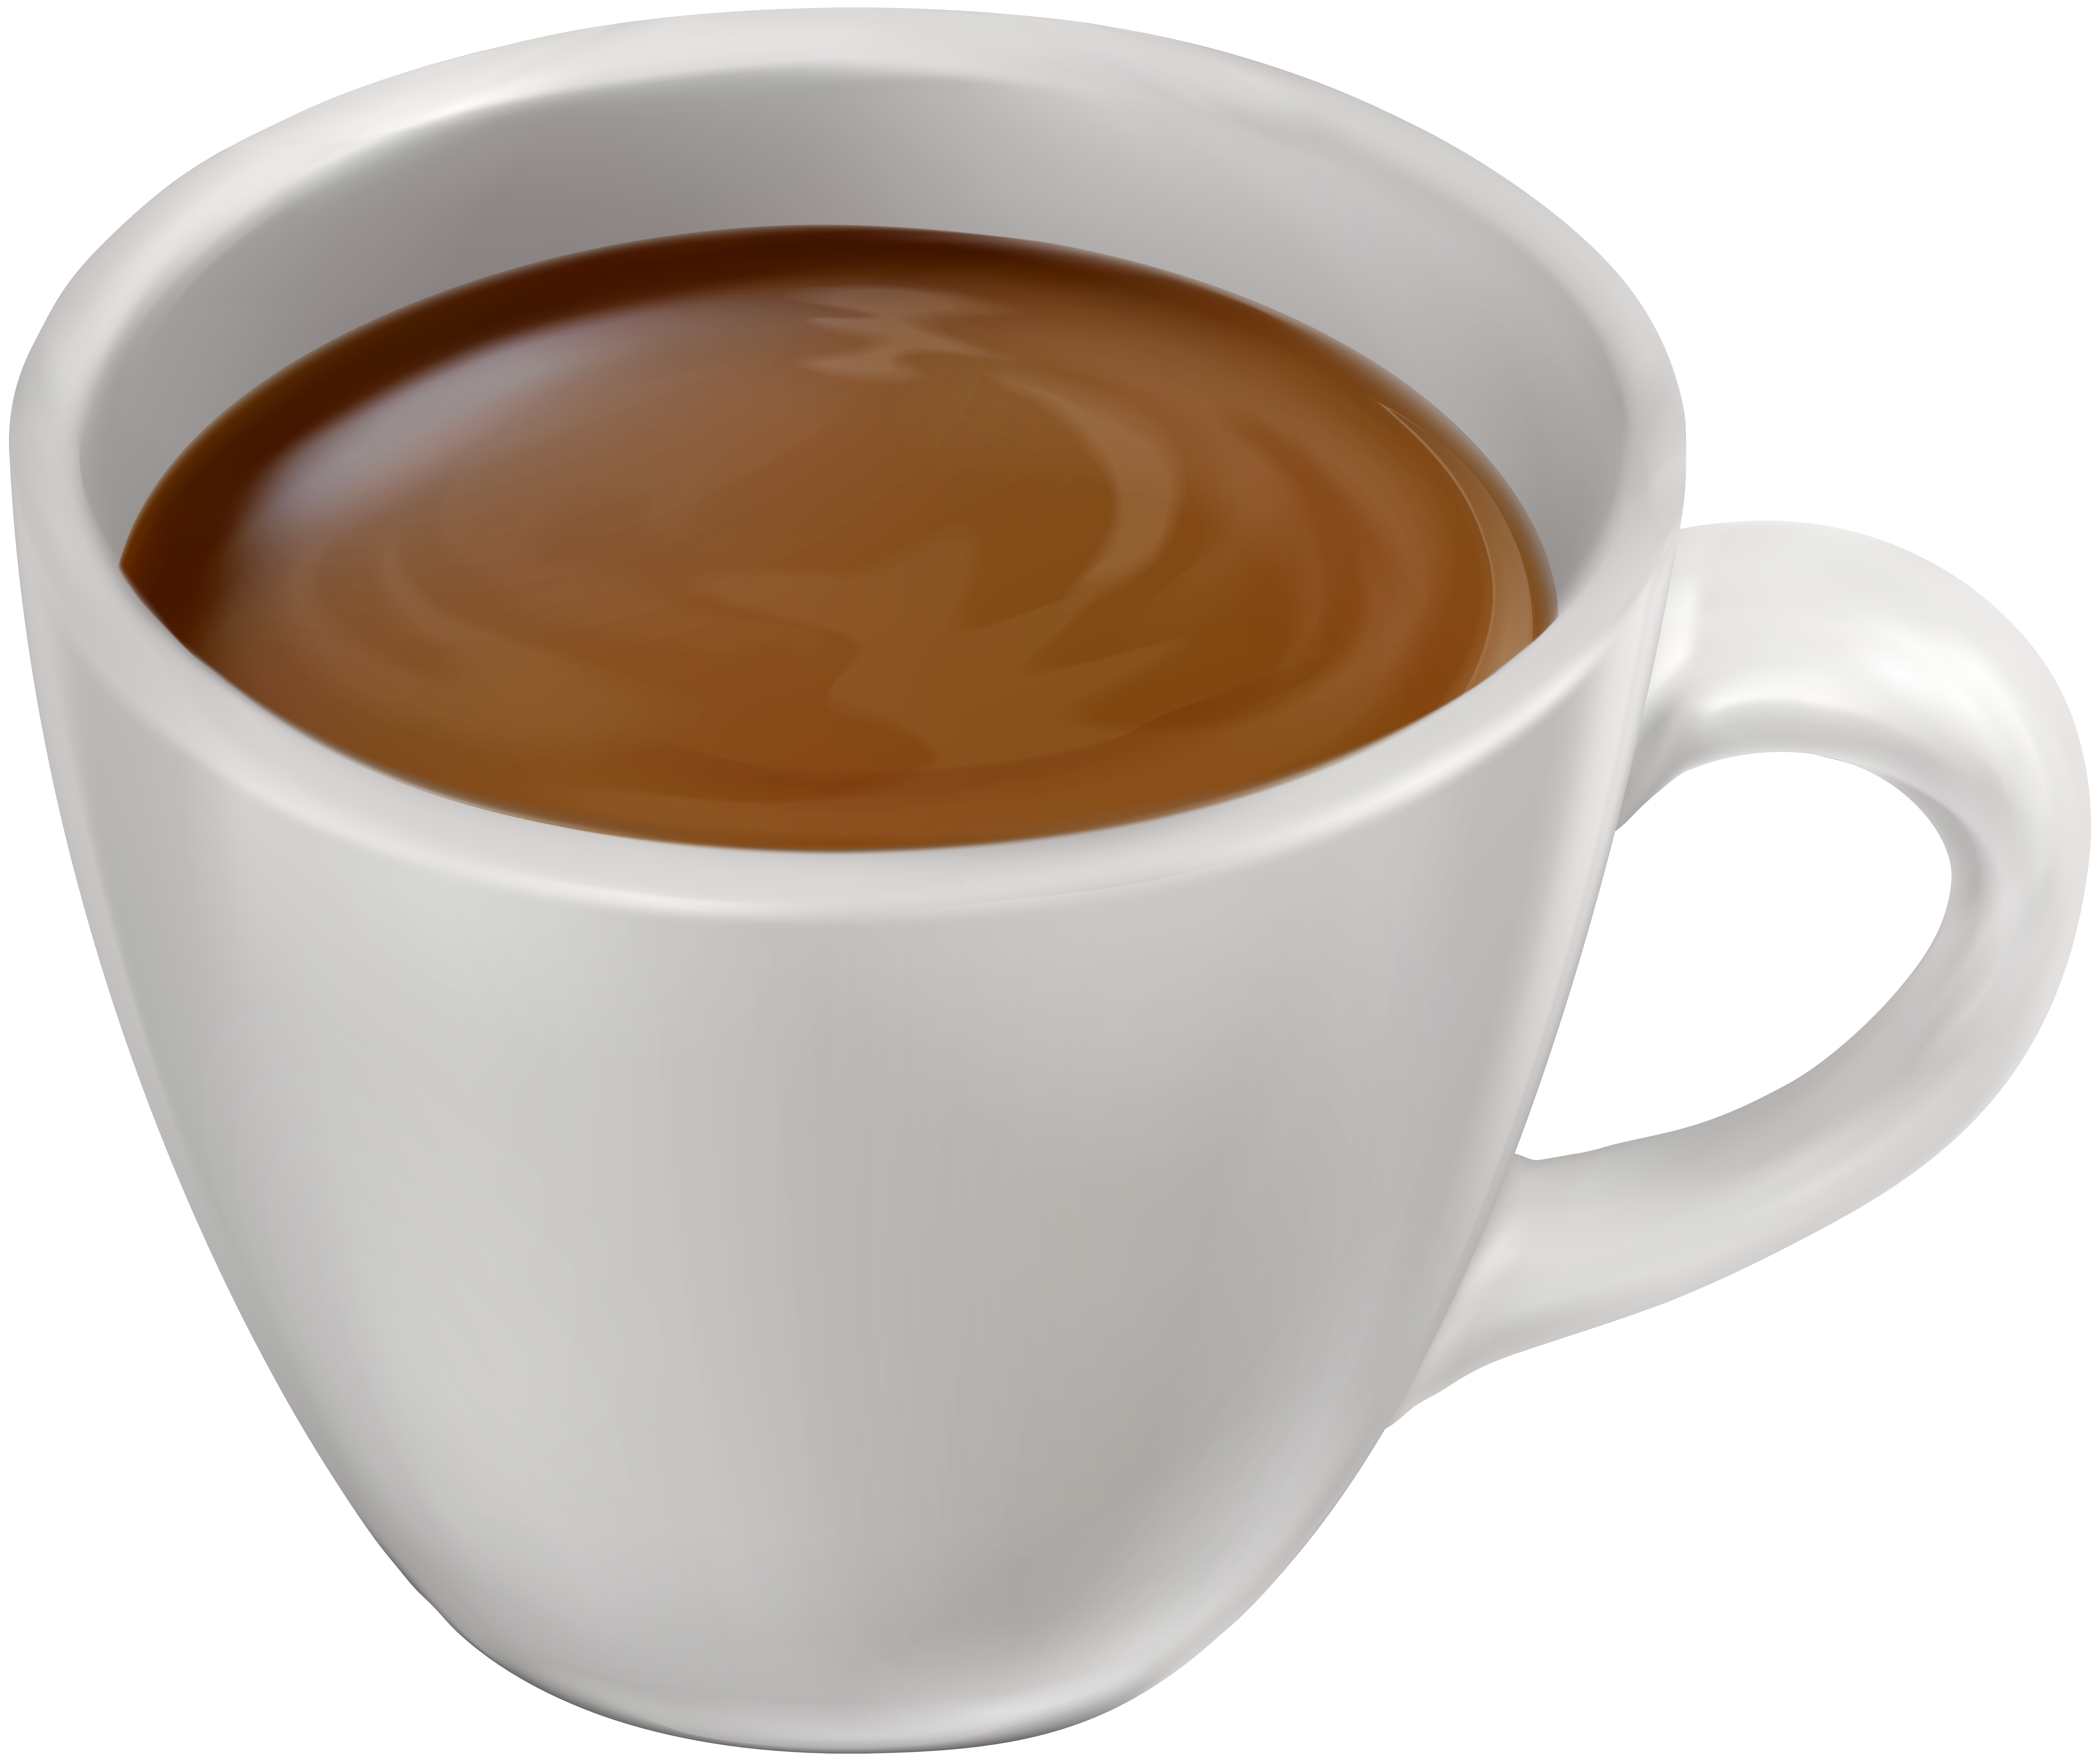 https://gallery.yopriceville.com/var/albums/Free-Clipart-Pictures/Coffee-PNG/Coffee_Cup_PNG_Clip_Art_Image.png?m=1498532102